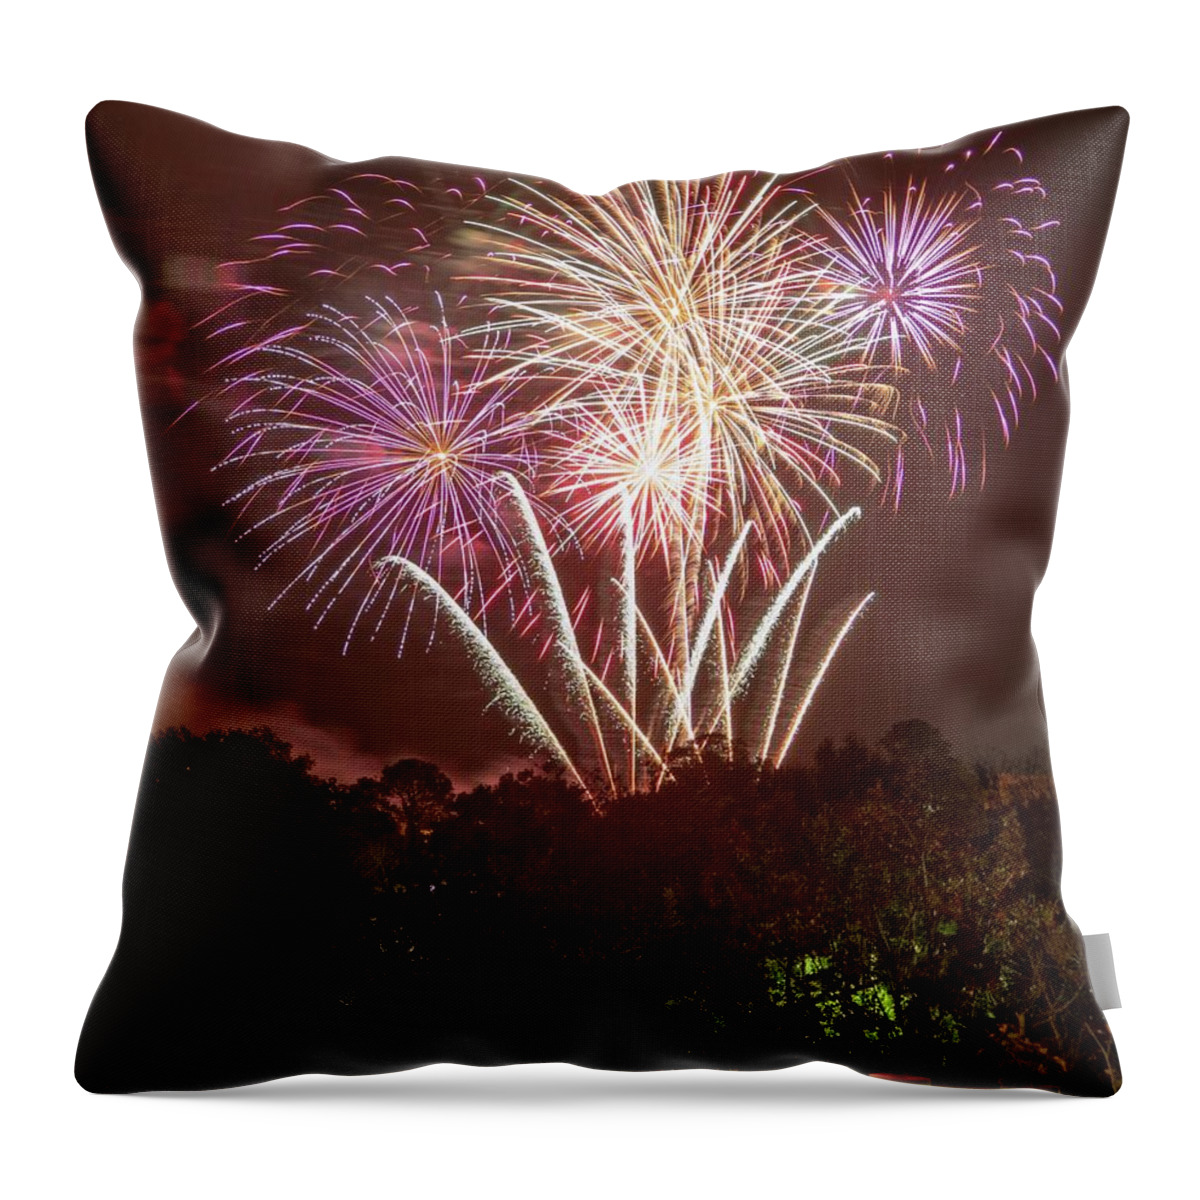 Happy New Year 2019 Fireworks Gainesville Florida Depot Park Throw Pillow featuring the photograph 2019 by Farol Tomson